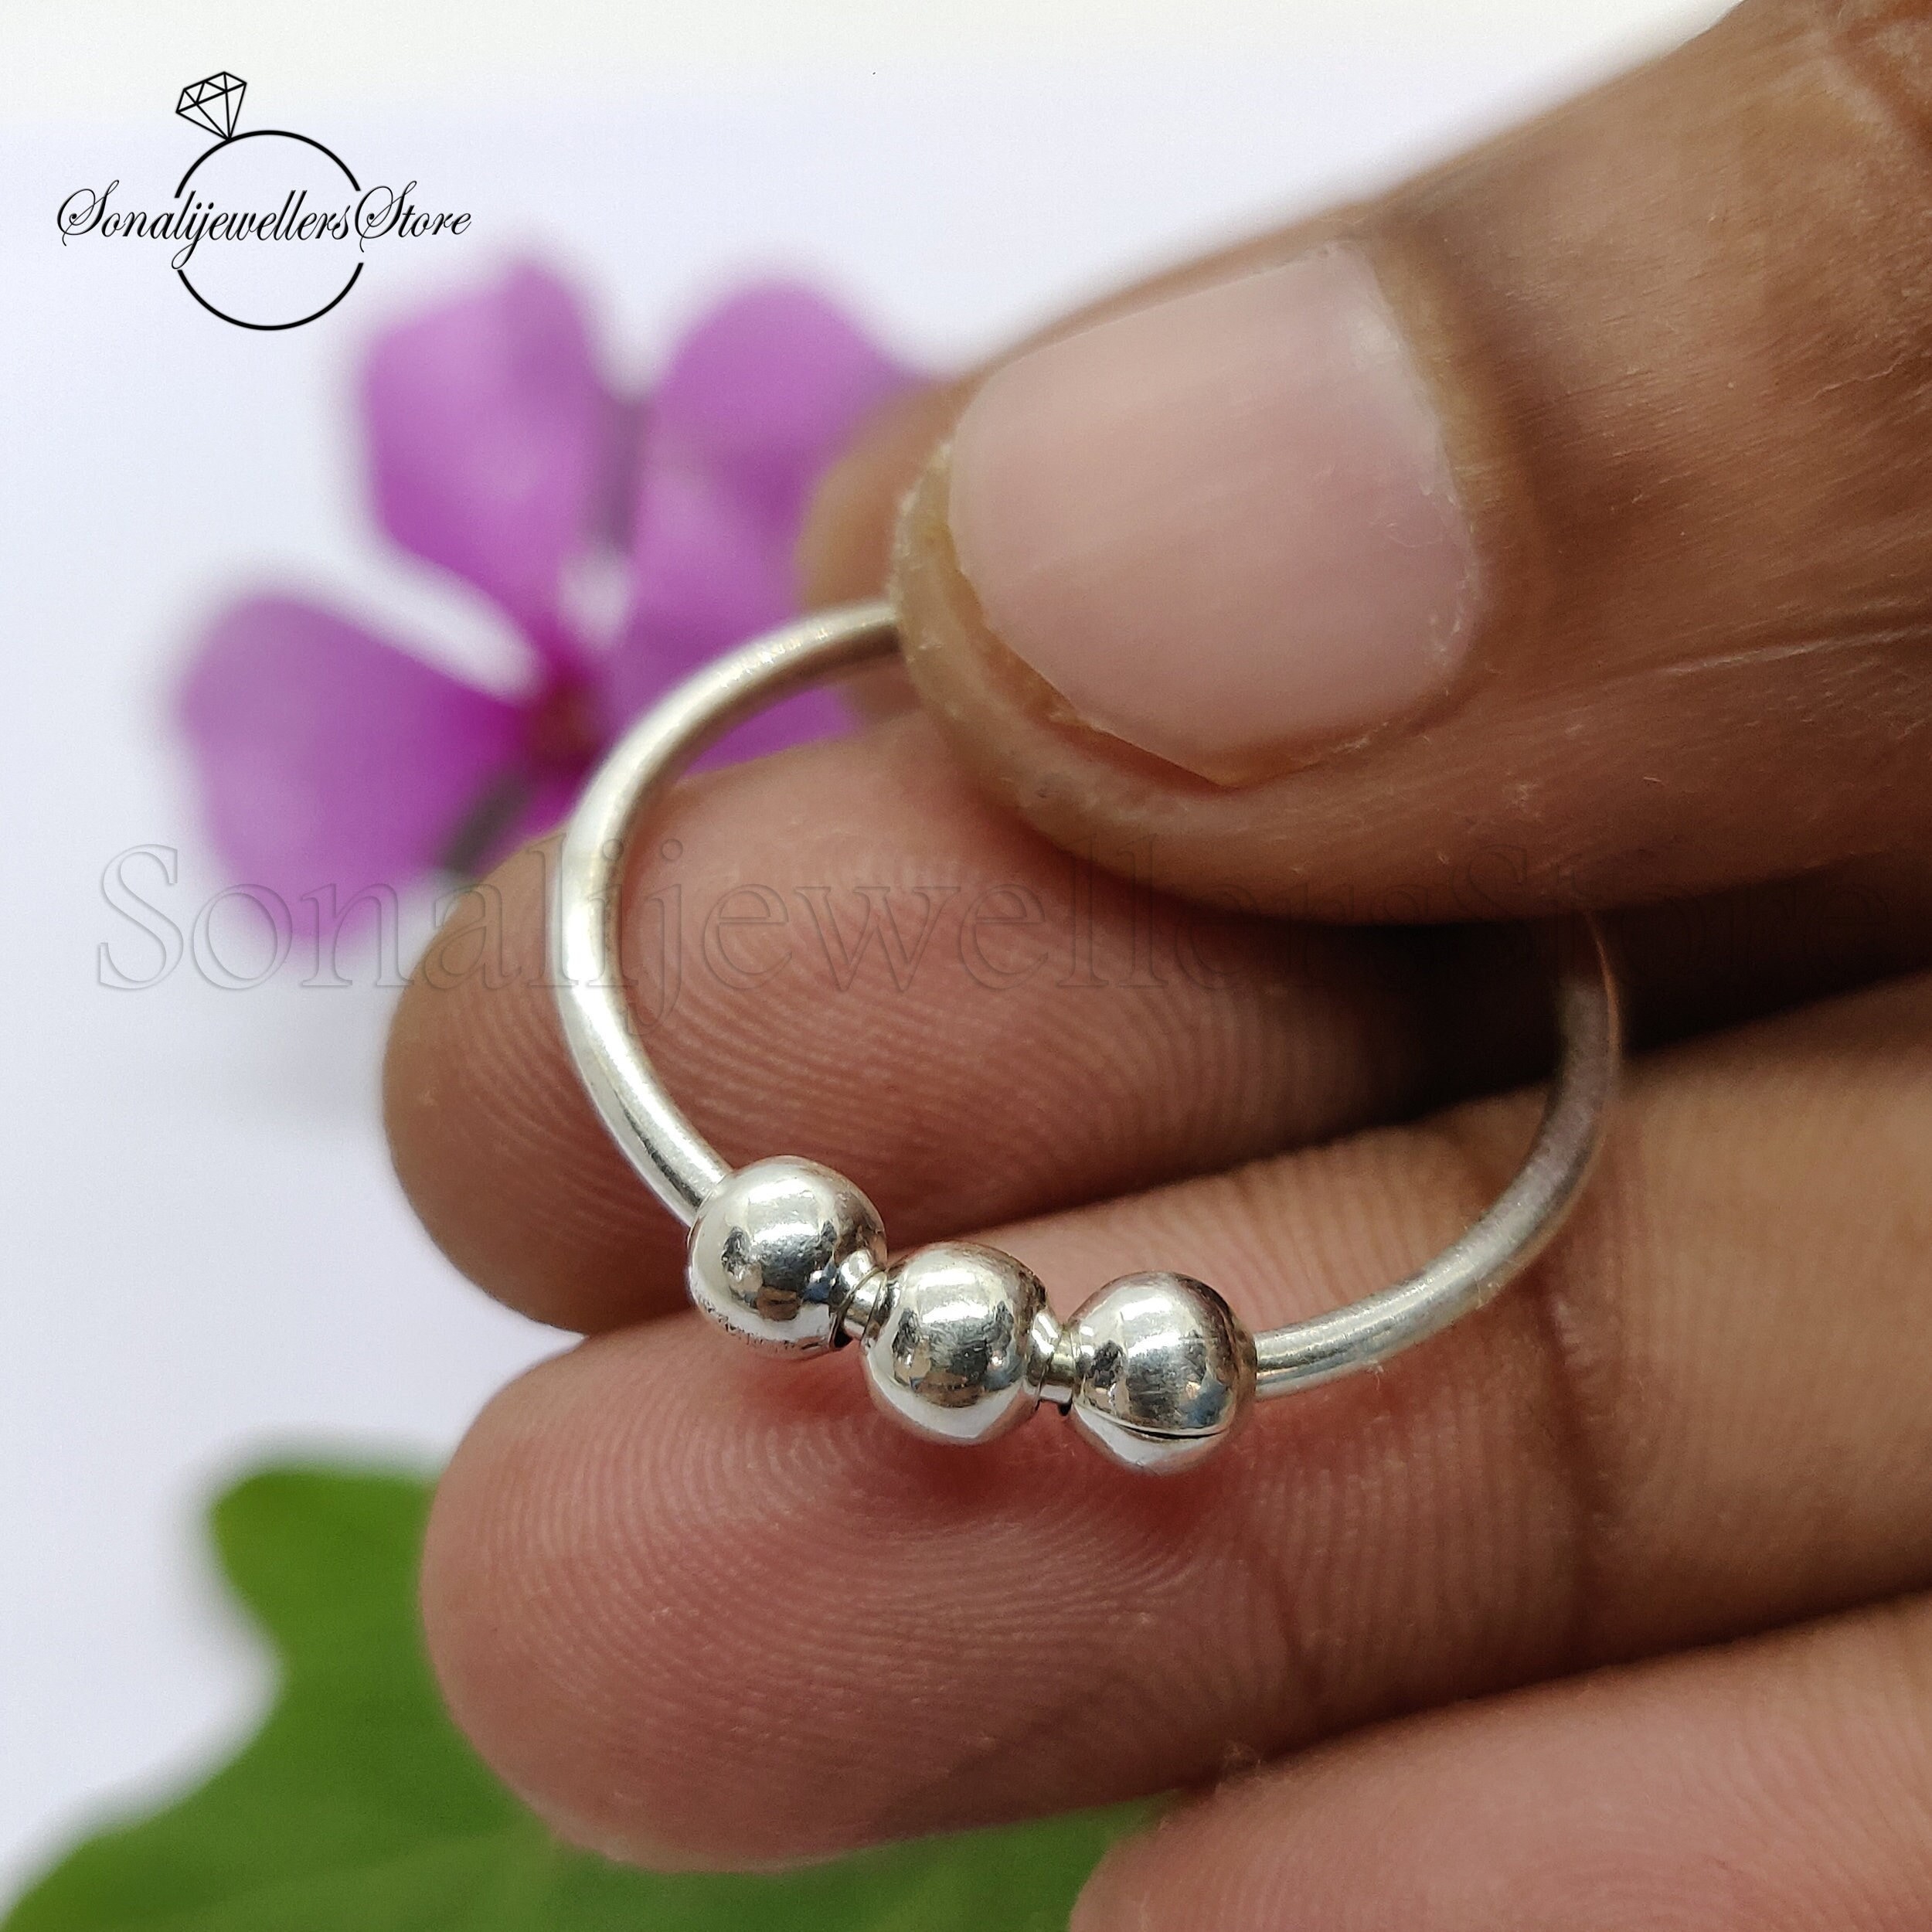 Pearl Ring Gift for her sterling silver anxiety ring,worry ring,Silver Anxiety Ring Spinner Anxiety Ring 925 Sterling Silver Orbit Ring